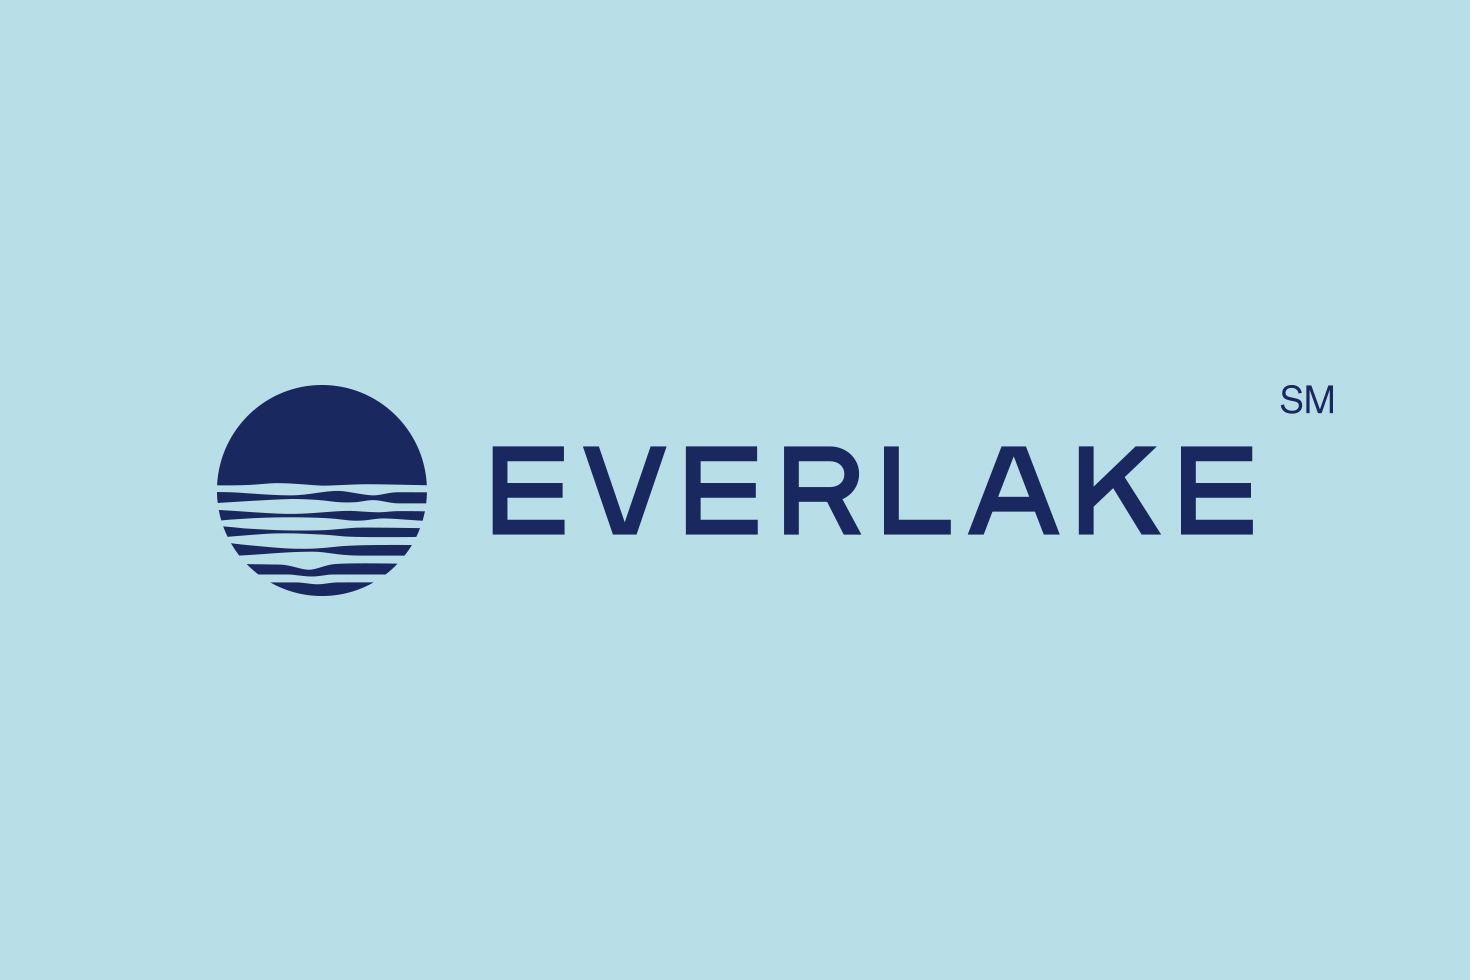 An image of the Everlake logo and wordmark with a turqoise background color and the logo and wordmark in dark blue. The logo is round with ripples resembling water.